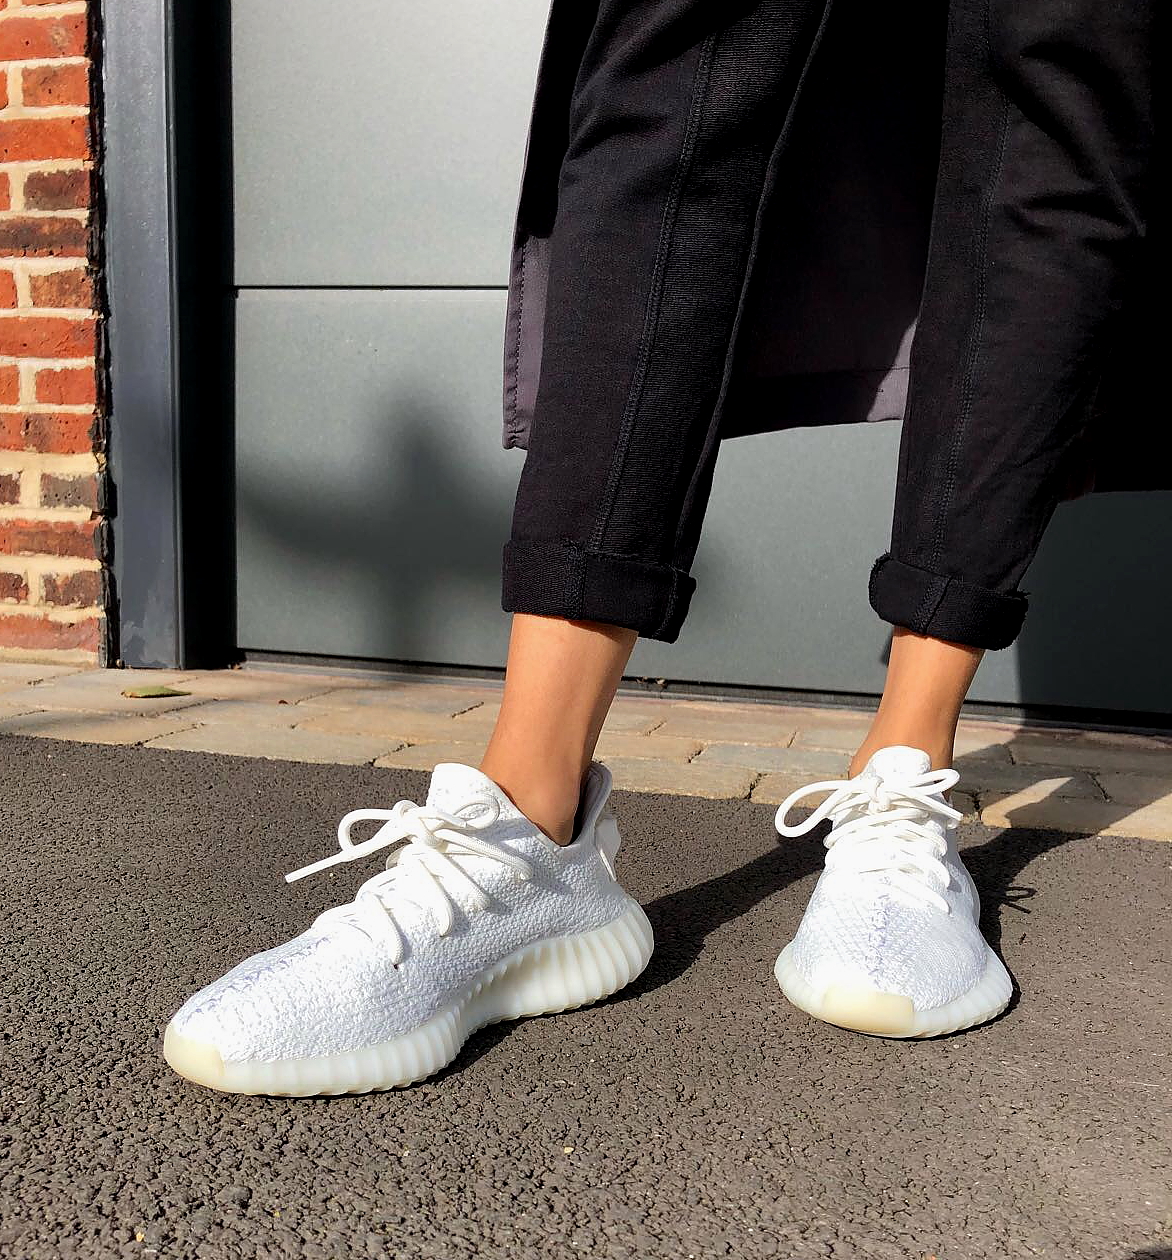 Styling up my Yeezys - The Style Count